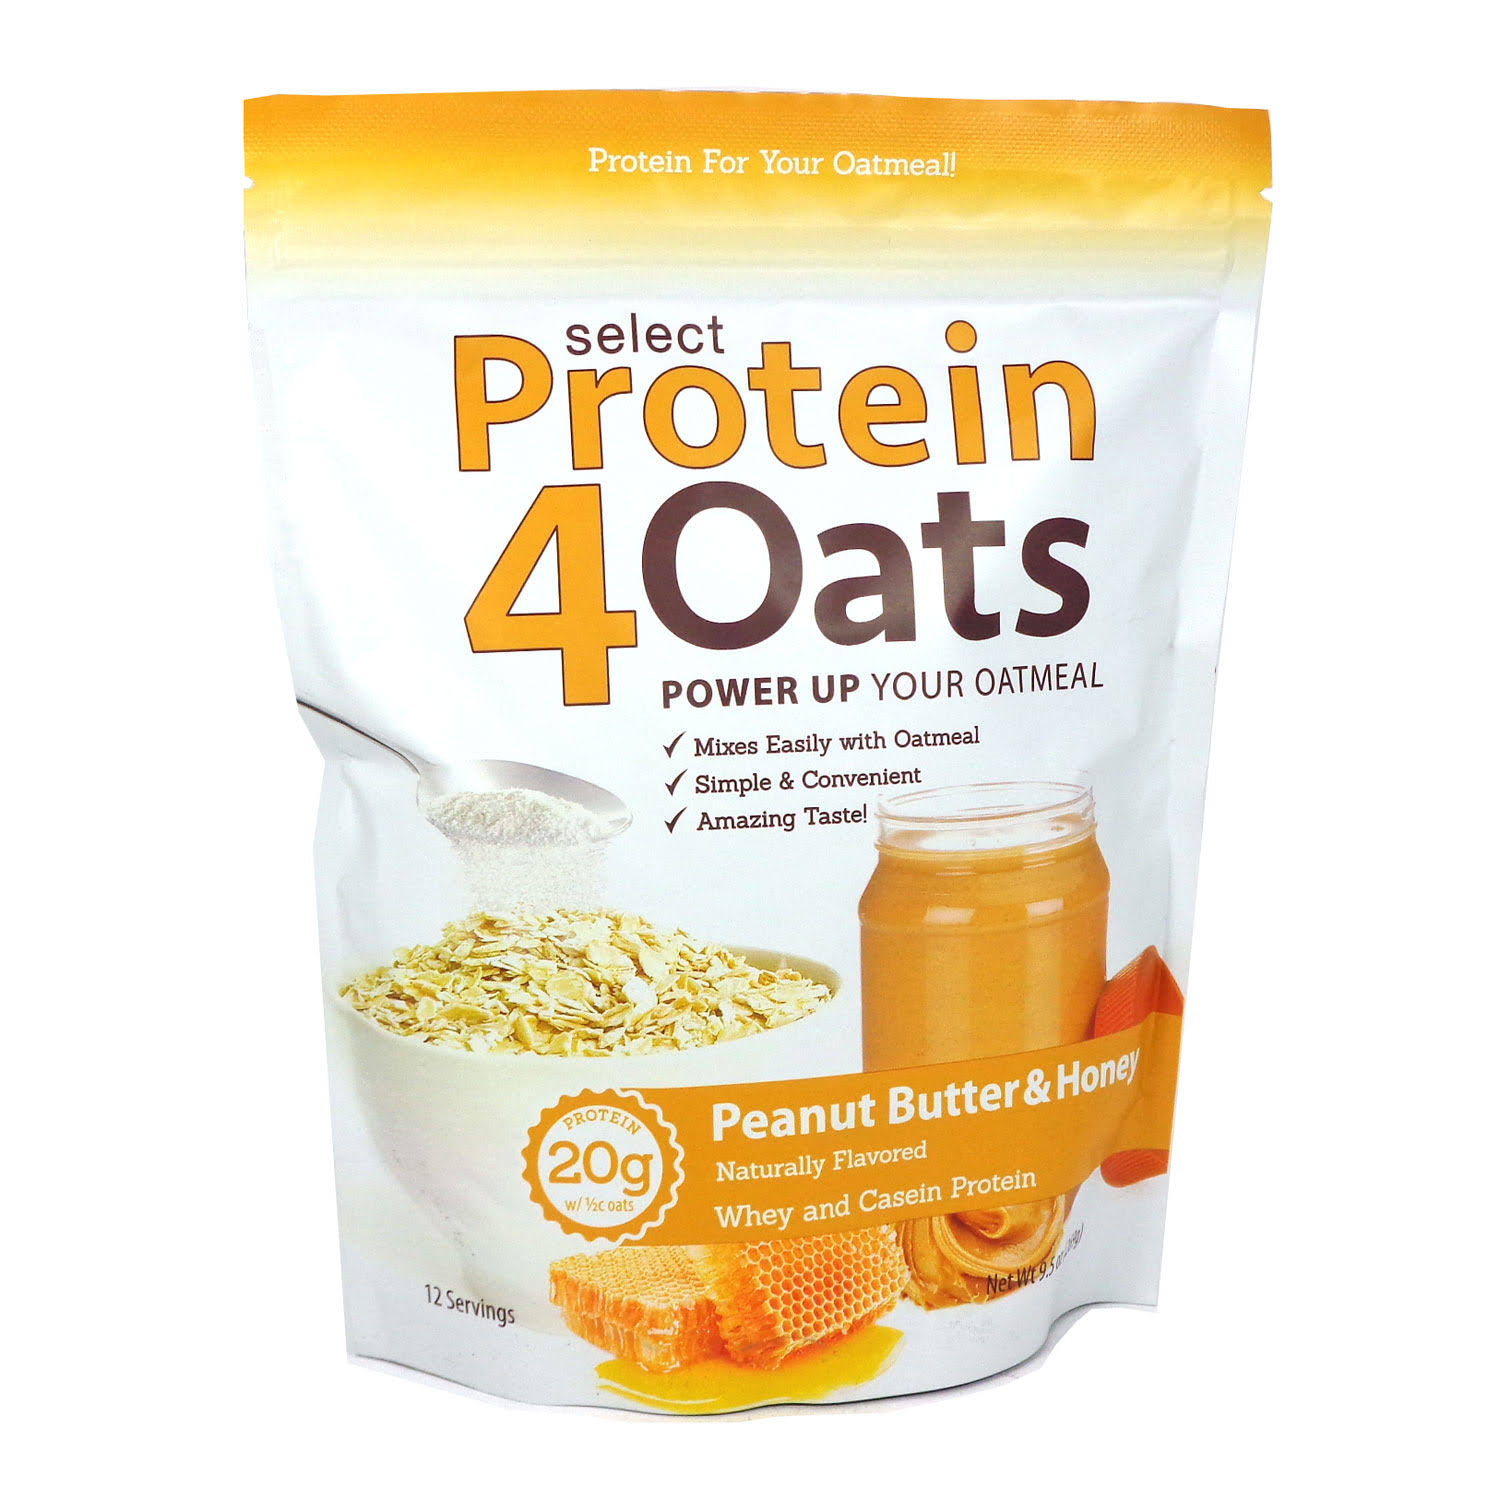 PEScience Select Protein4Oats (12 Servings Peanut Butter & Honey)